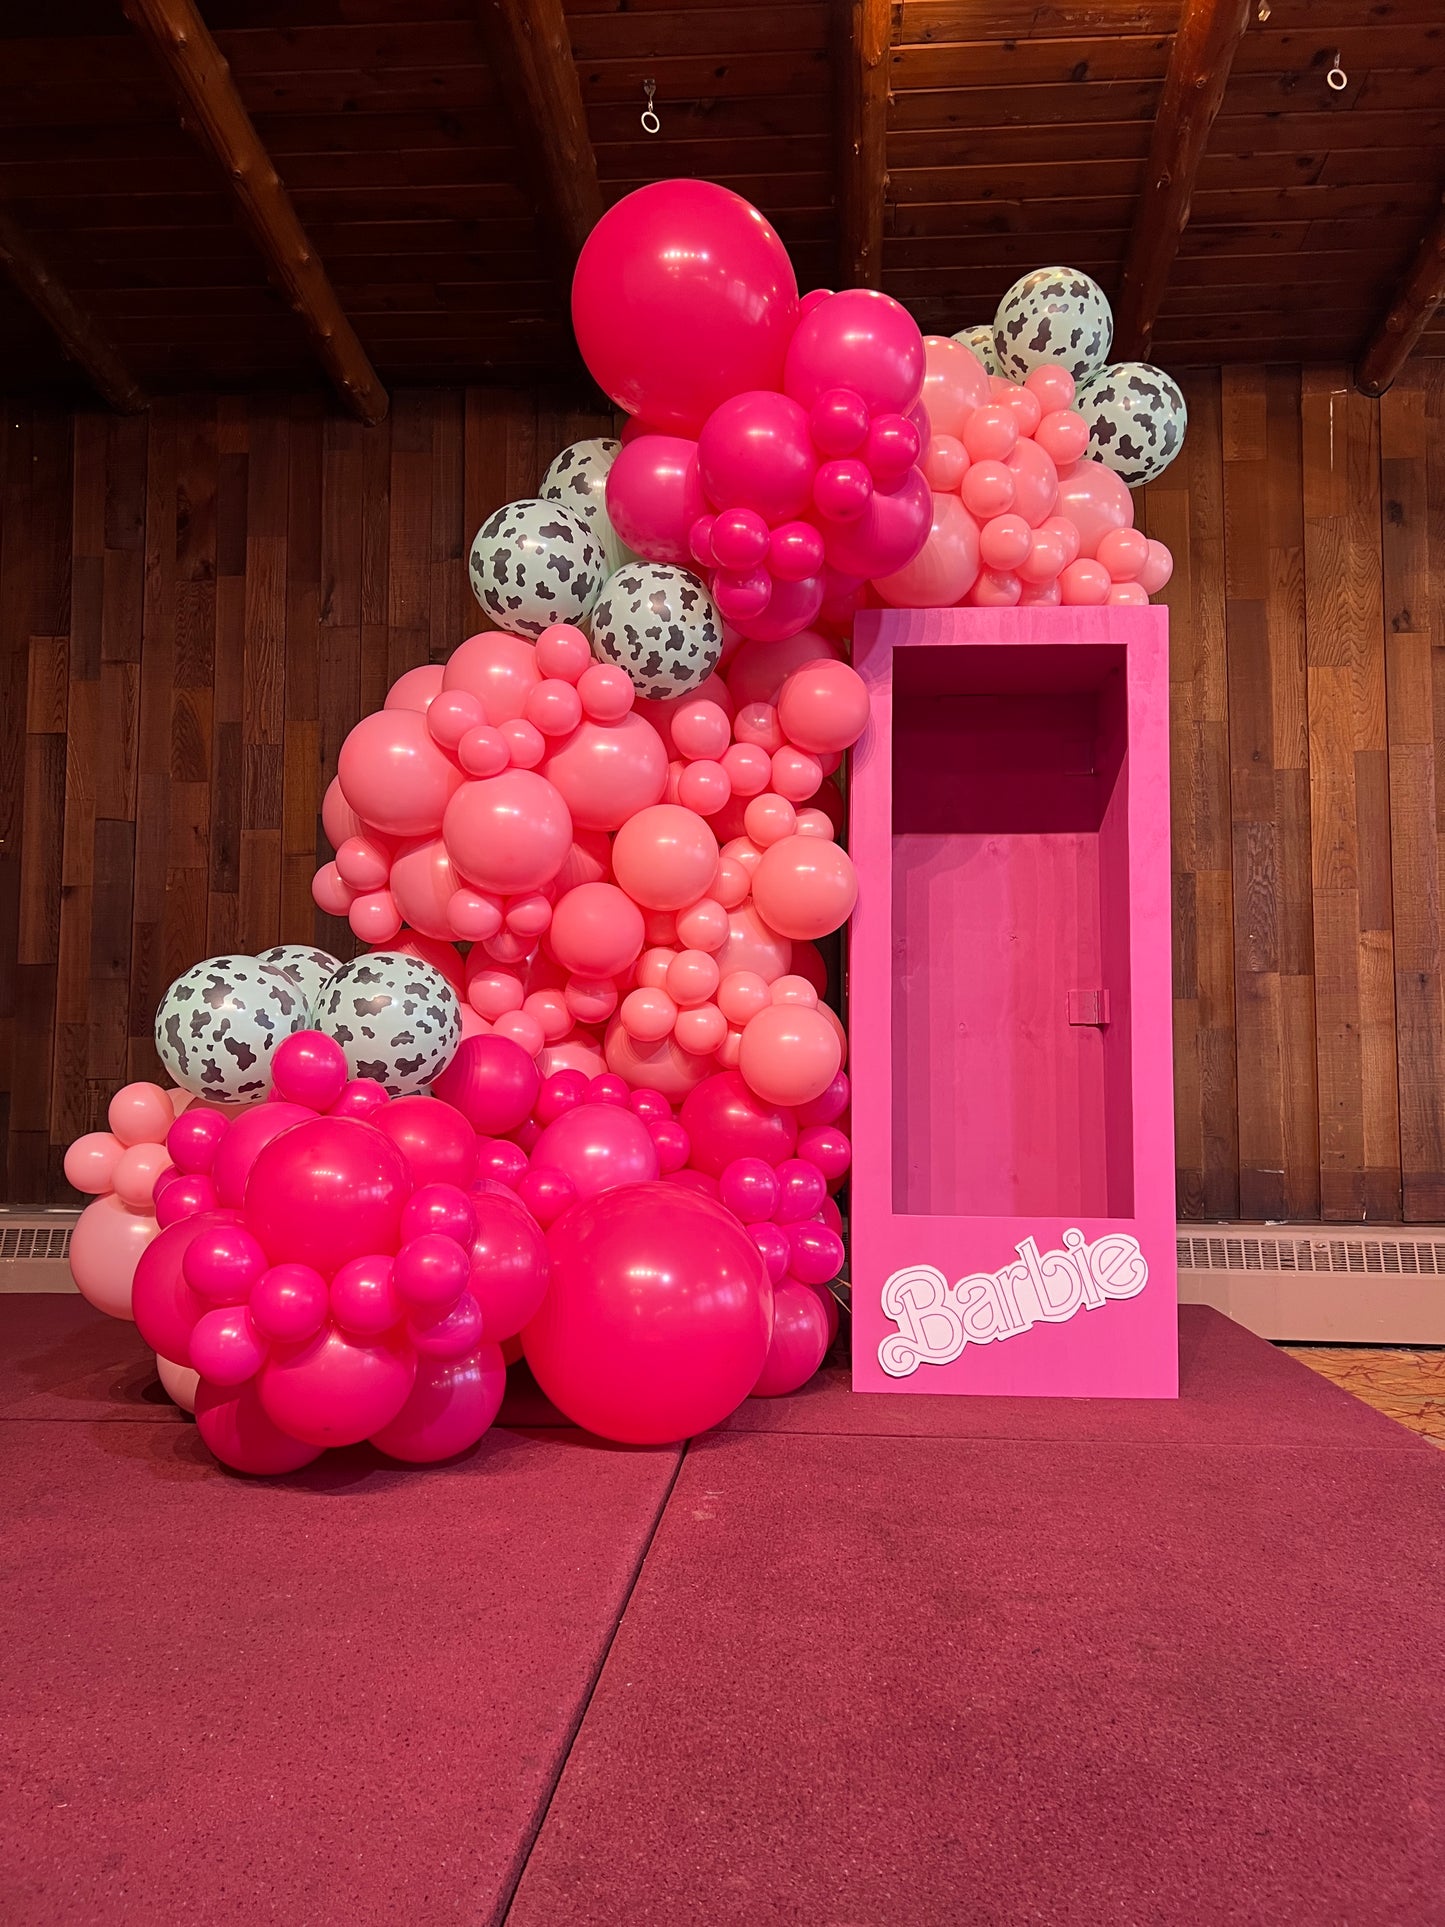 5 Foot Tall Barbie Box with Balloons